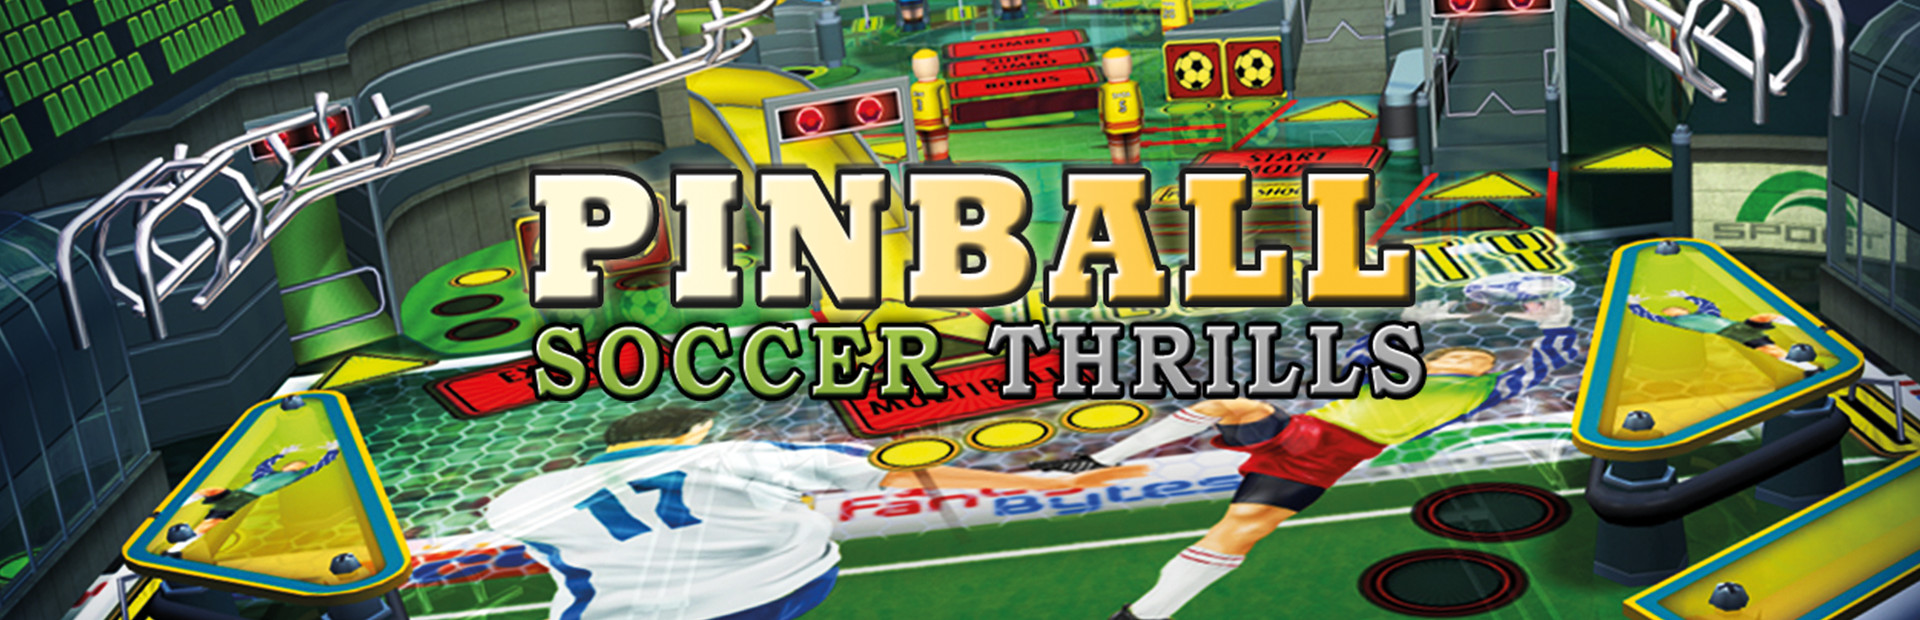 Soccer Pinball Thrills cover image